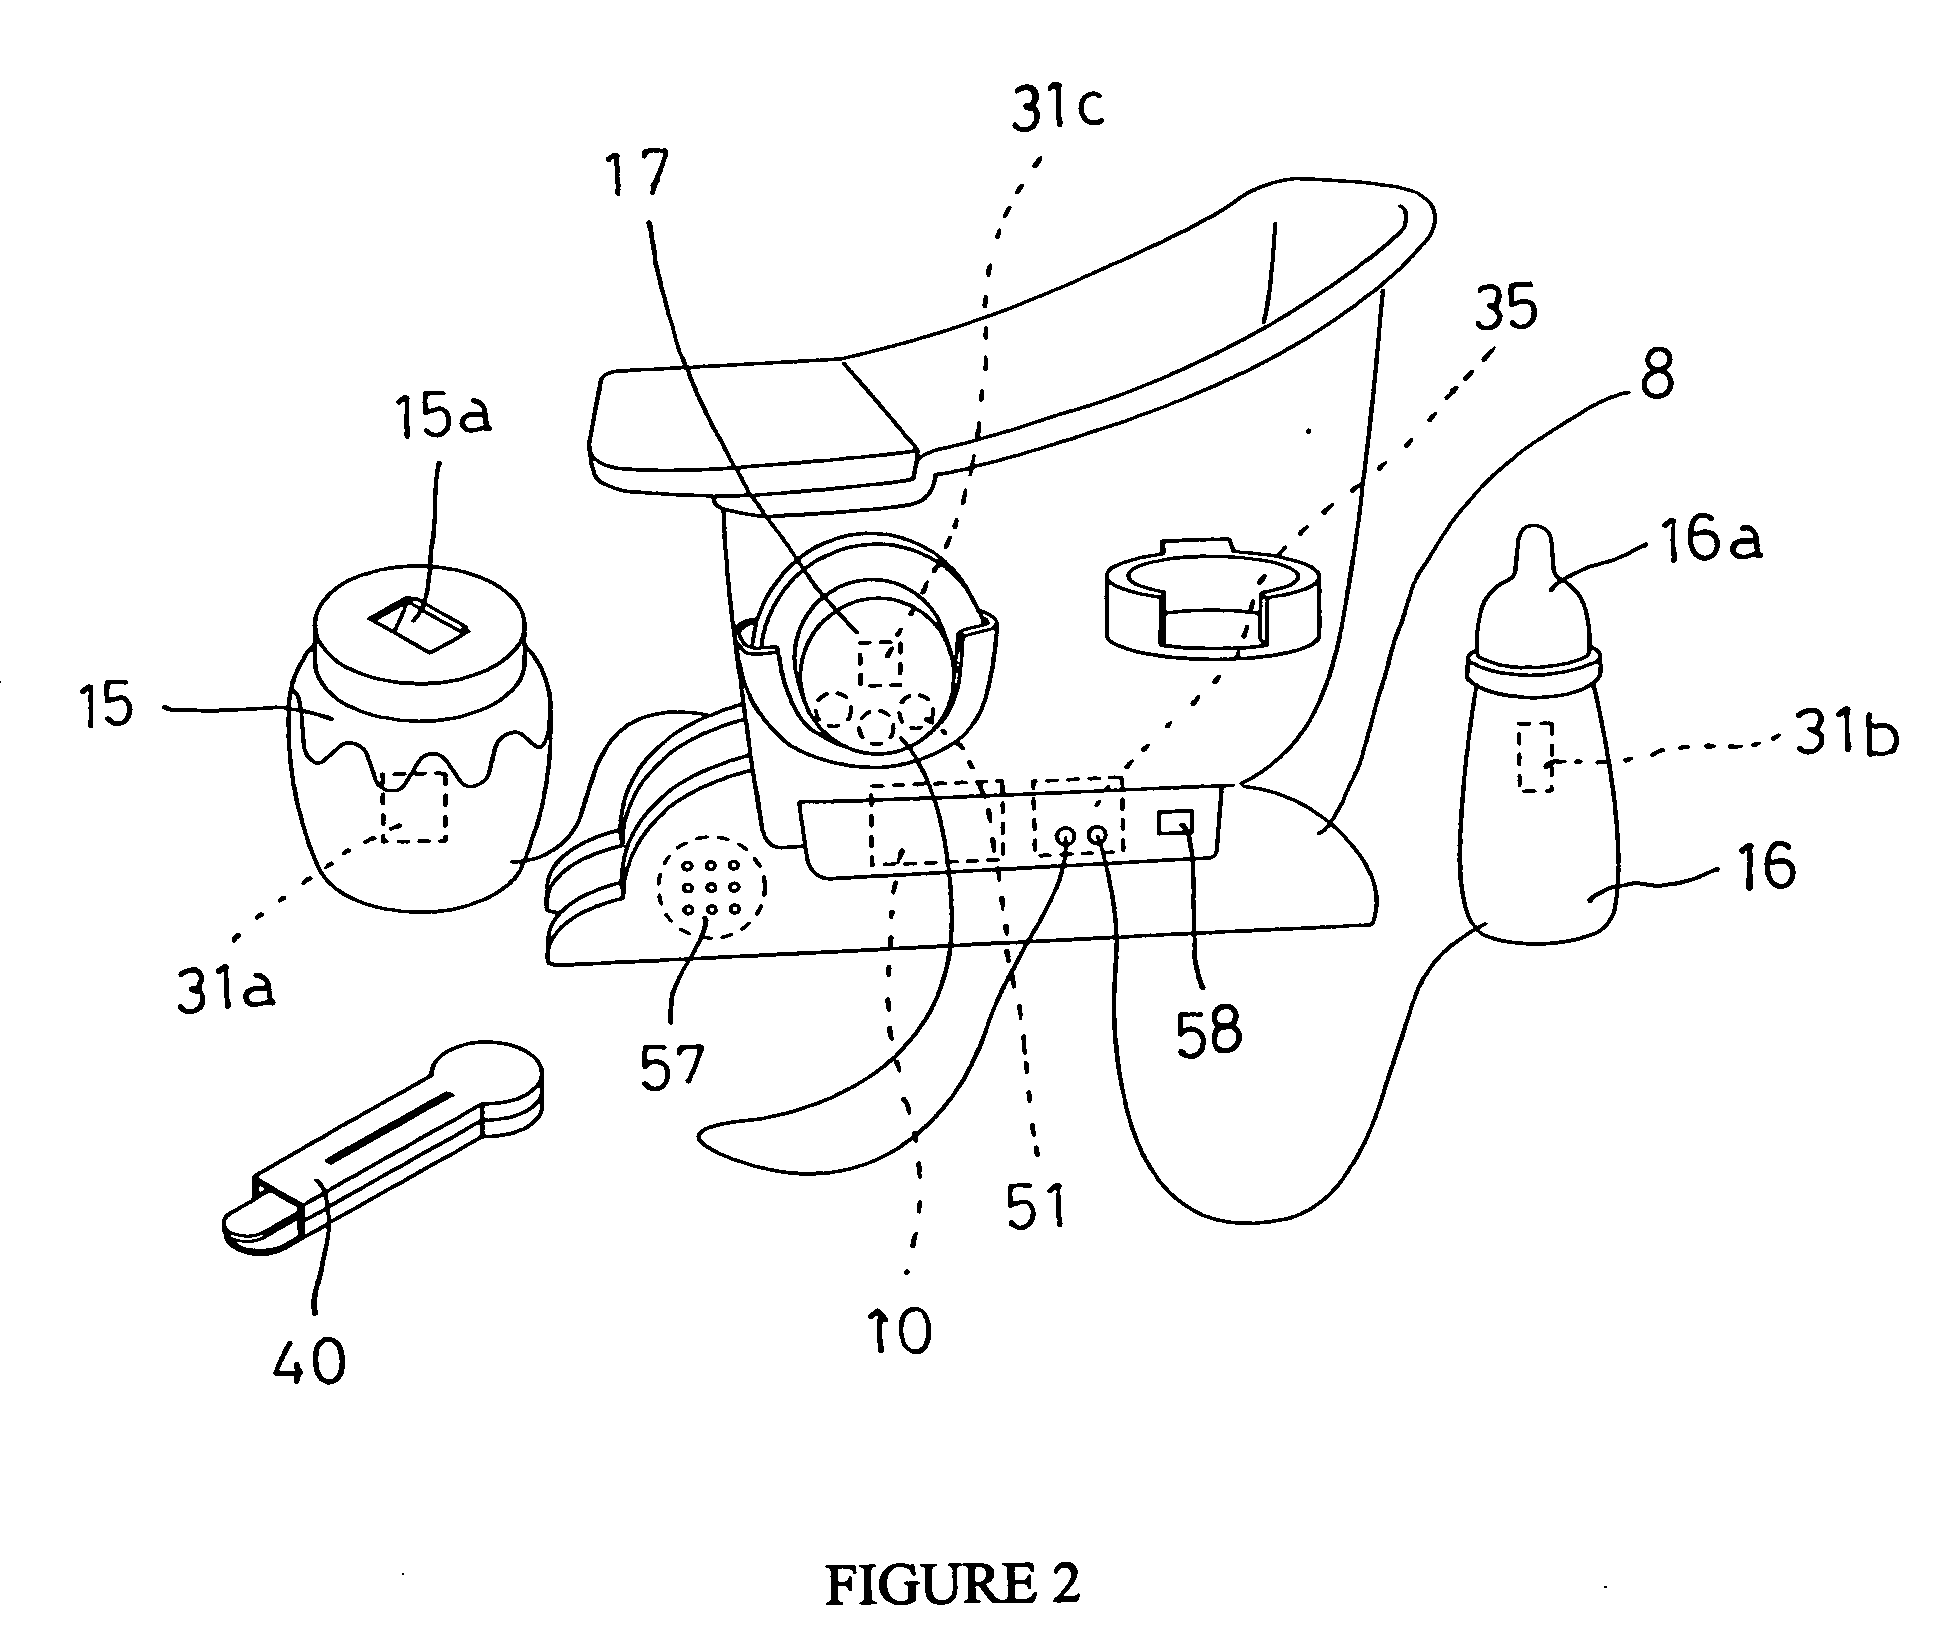 Toy actuation device